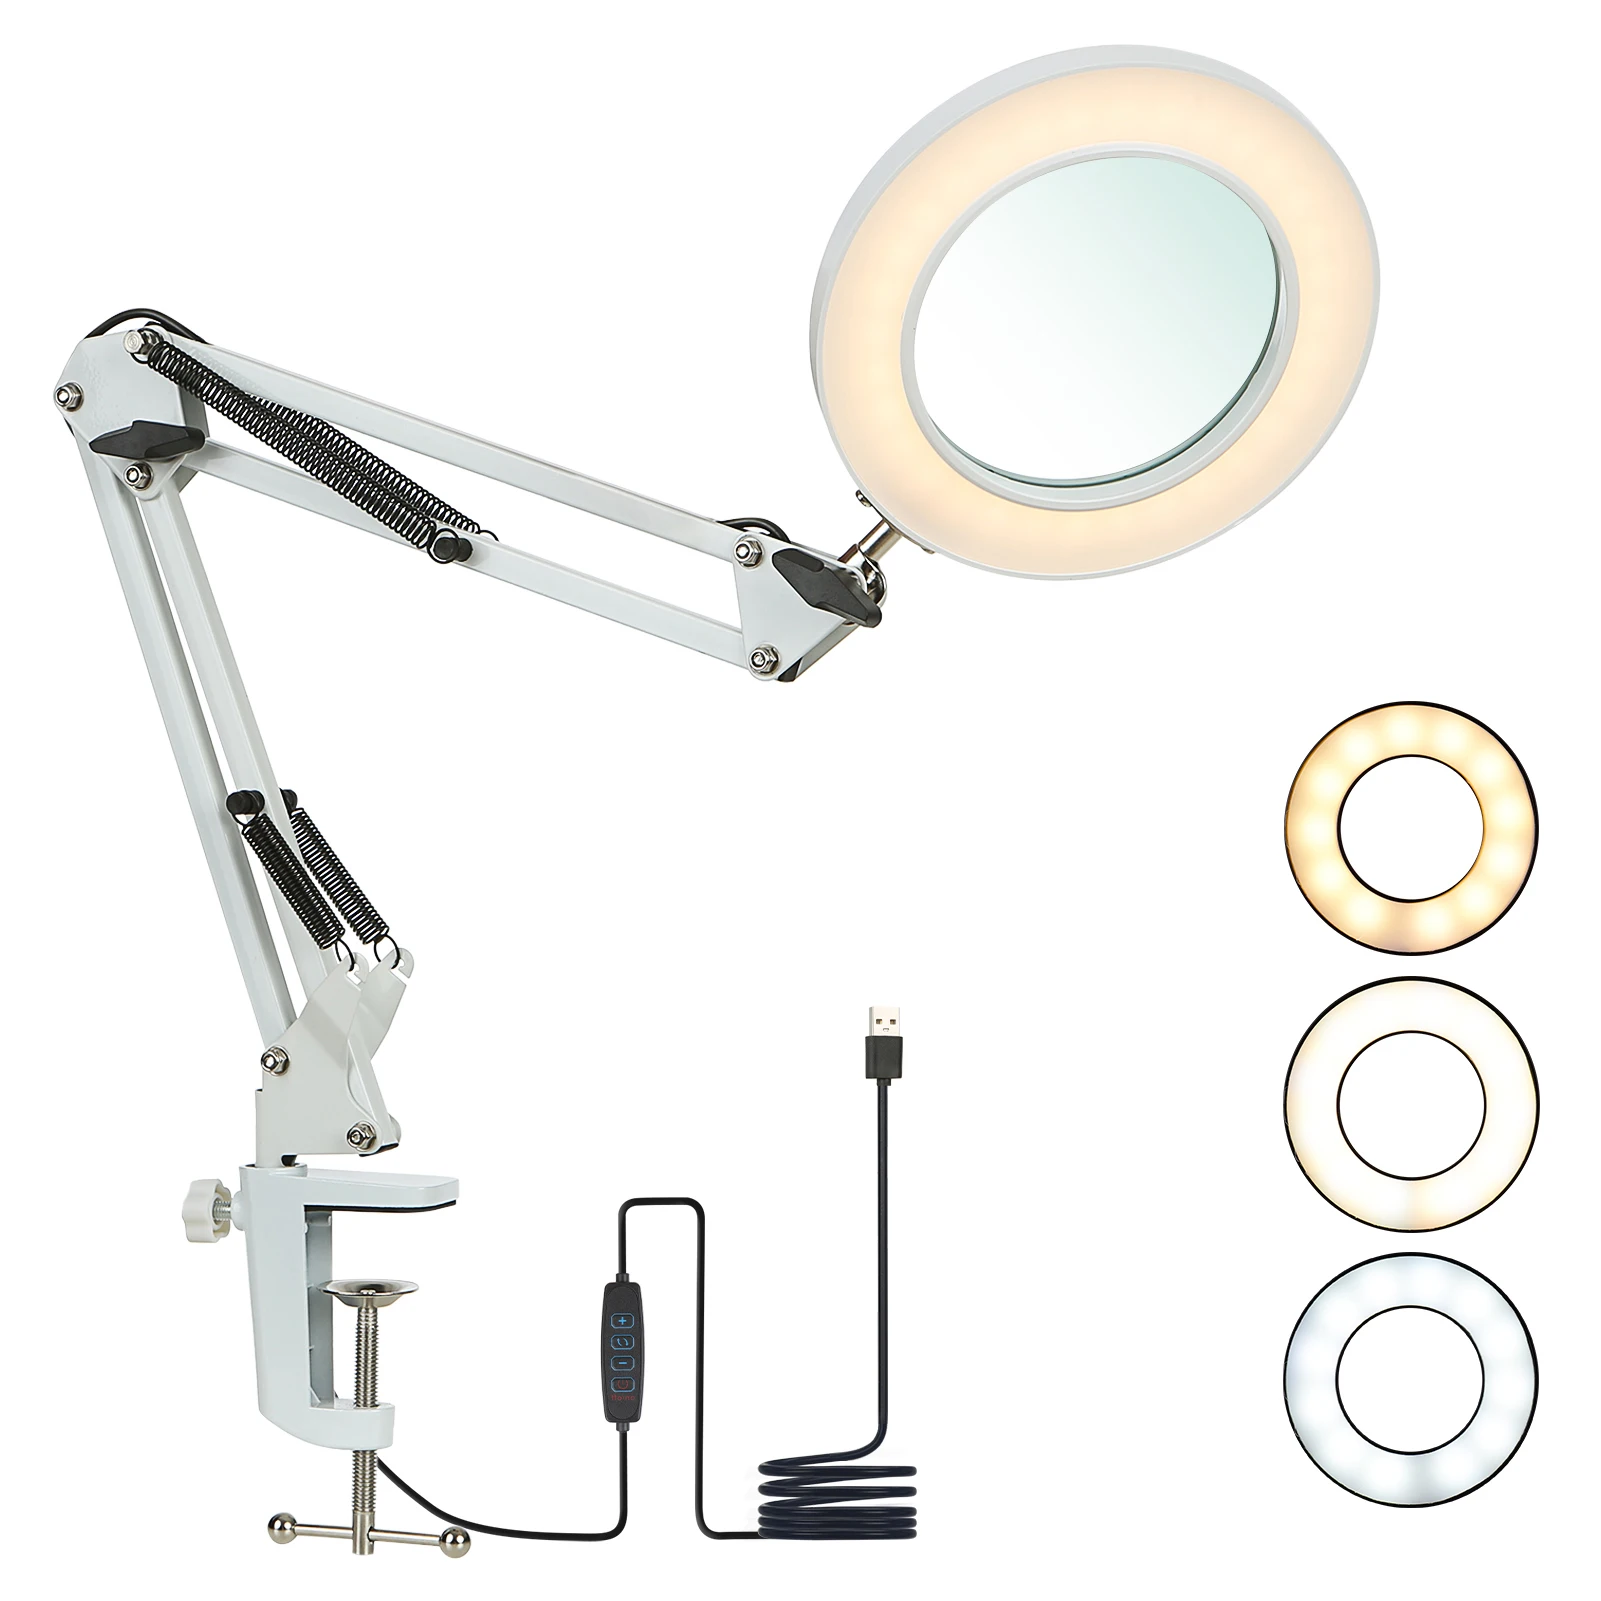 Exible clamp on table lamp with 8x magnifier swing arm dimmable leds desk light reading thumb200